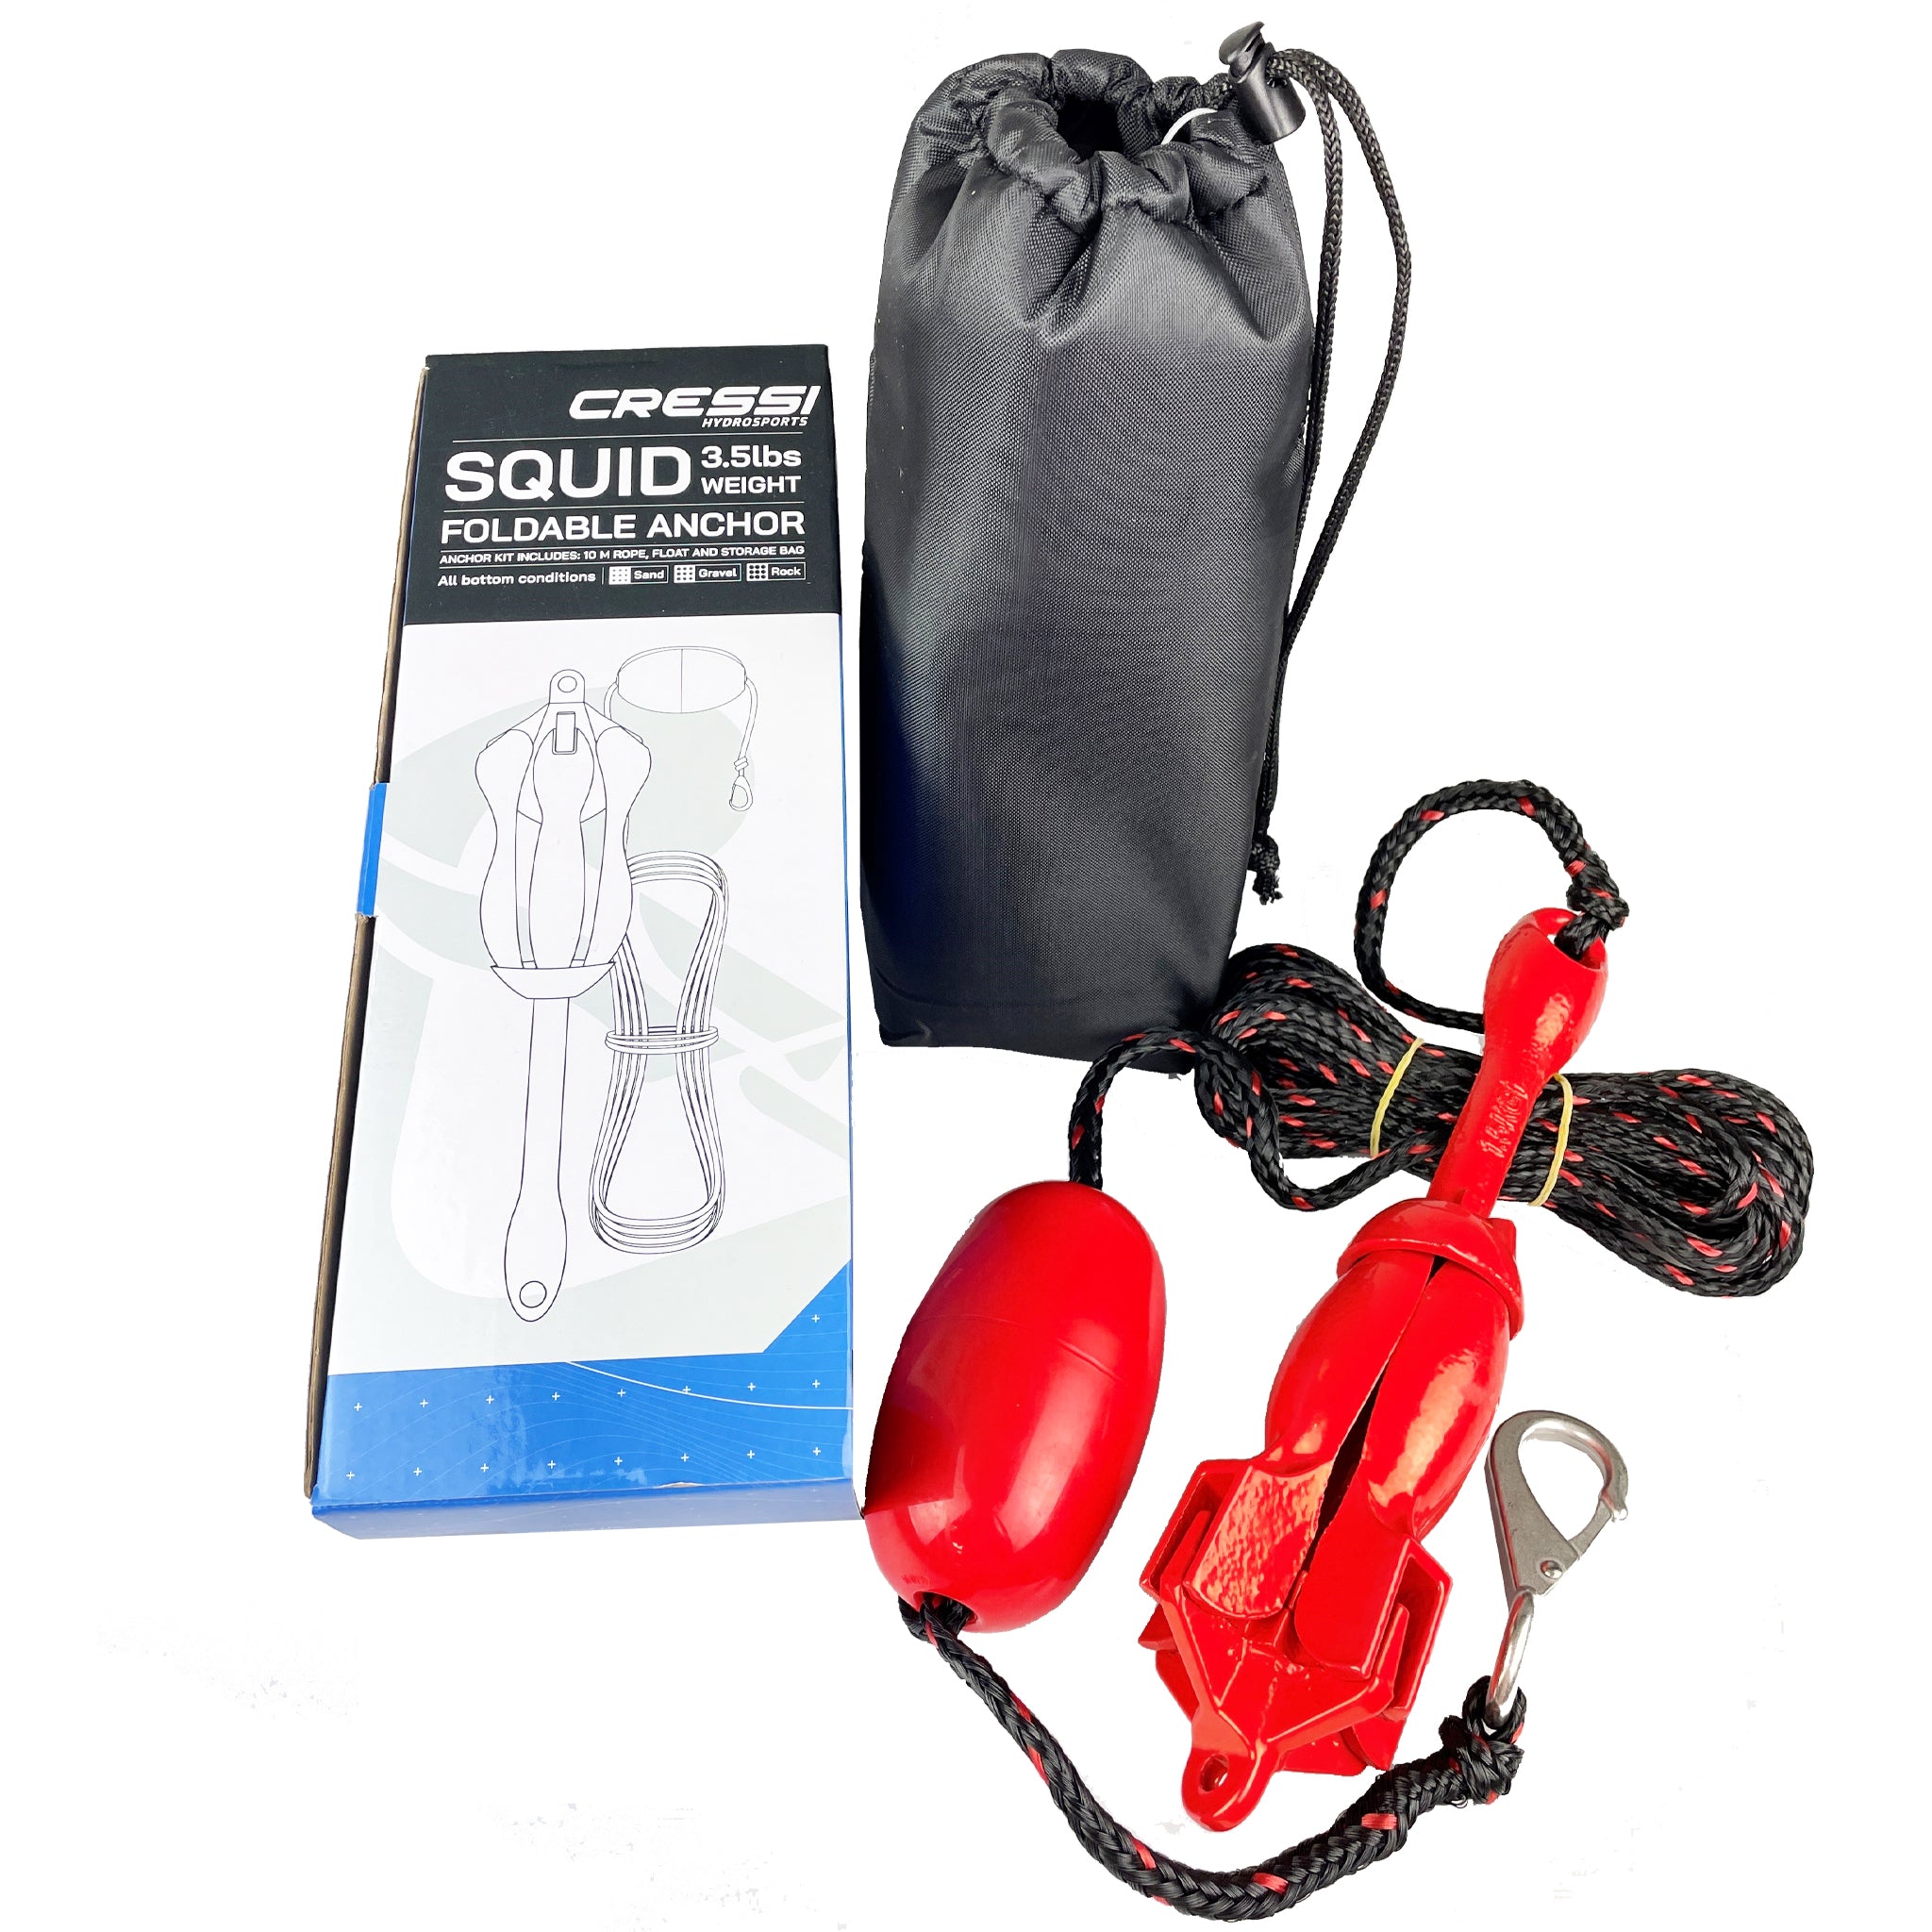 Cressi Squid Foldable Anchor Set for iSUP and Kayaks Package